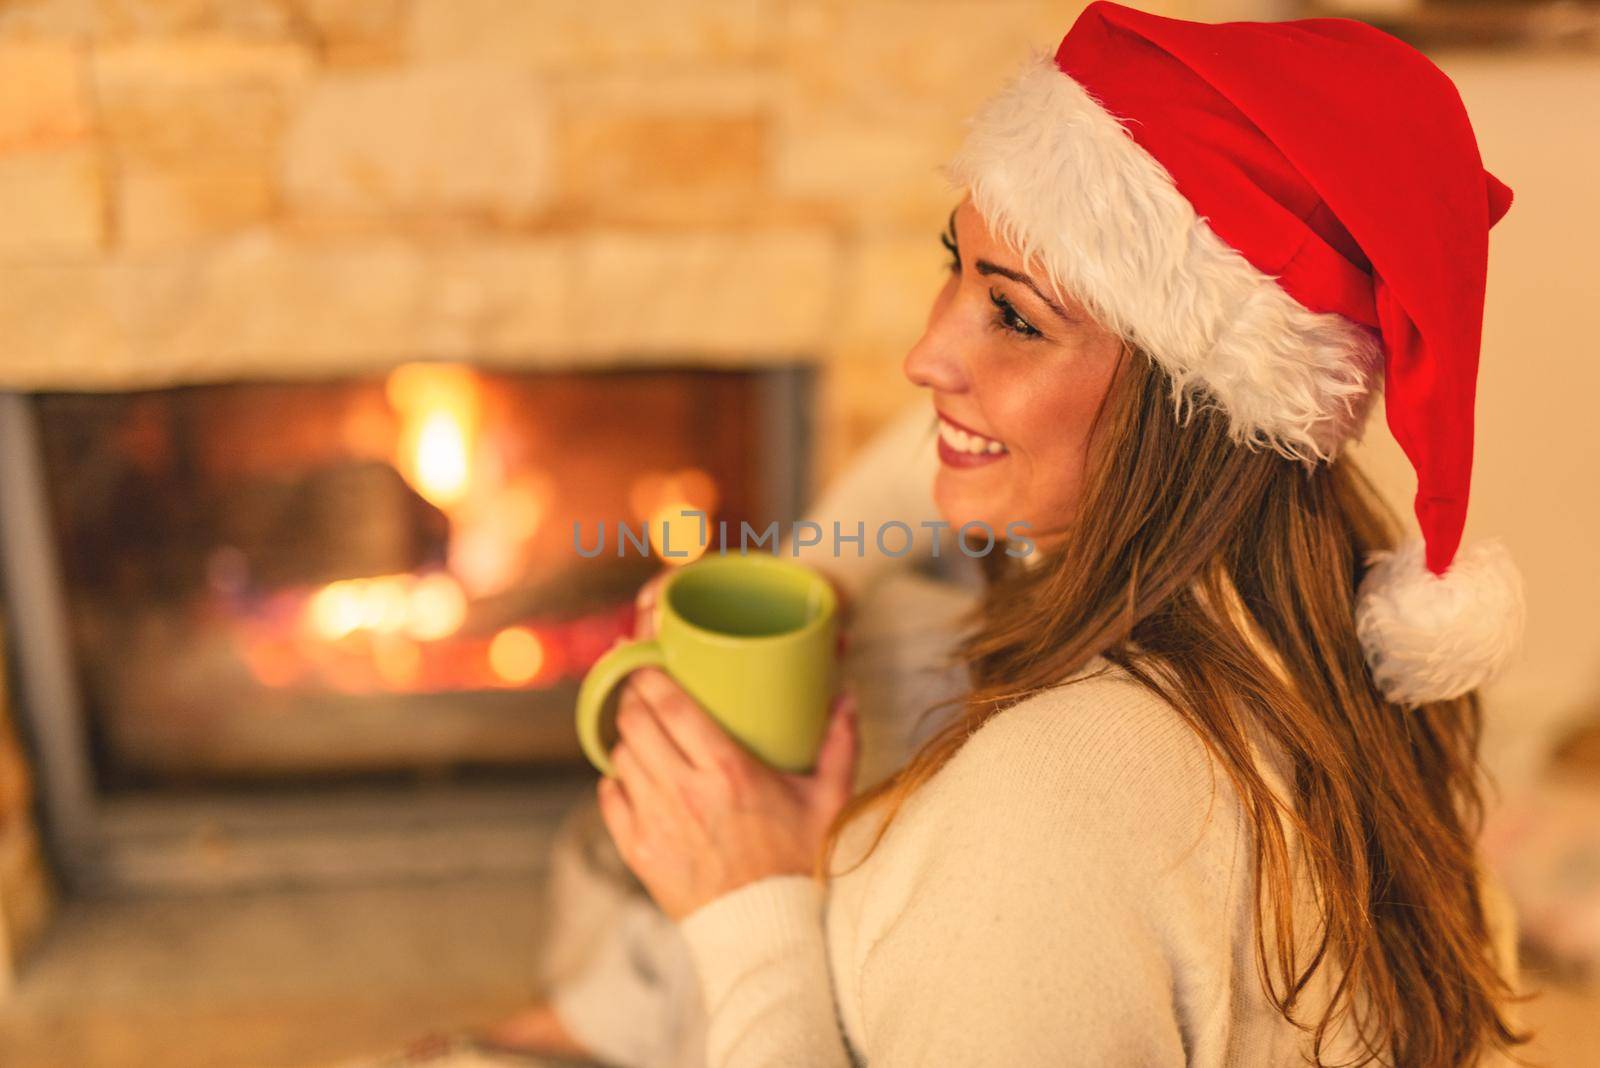 Beautiful young smiling woman enjoying a cup of tea by the fireplace in Christmas evening.